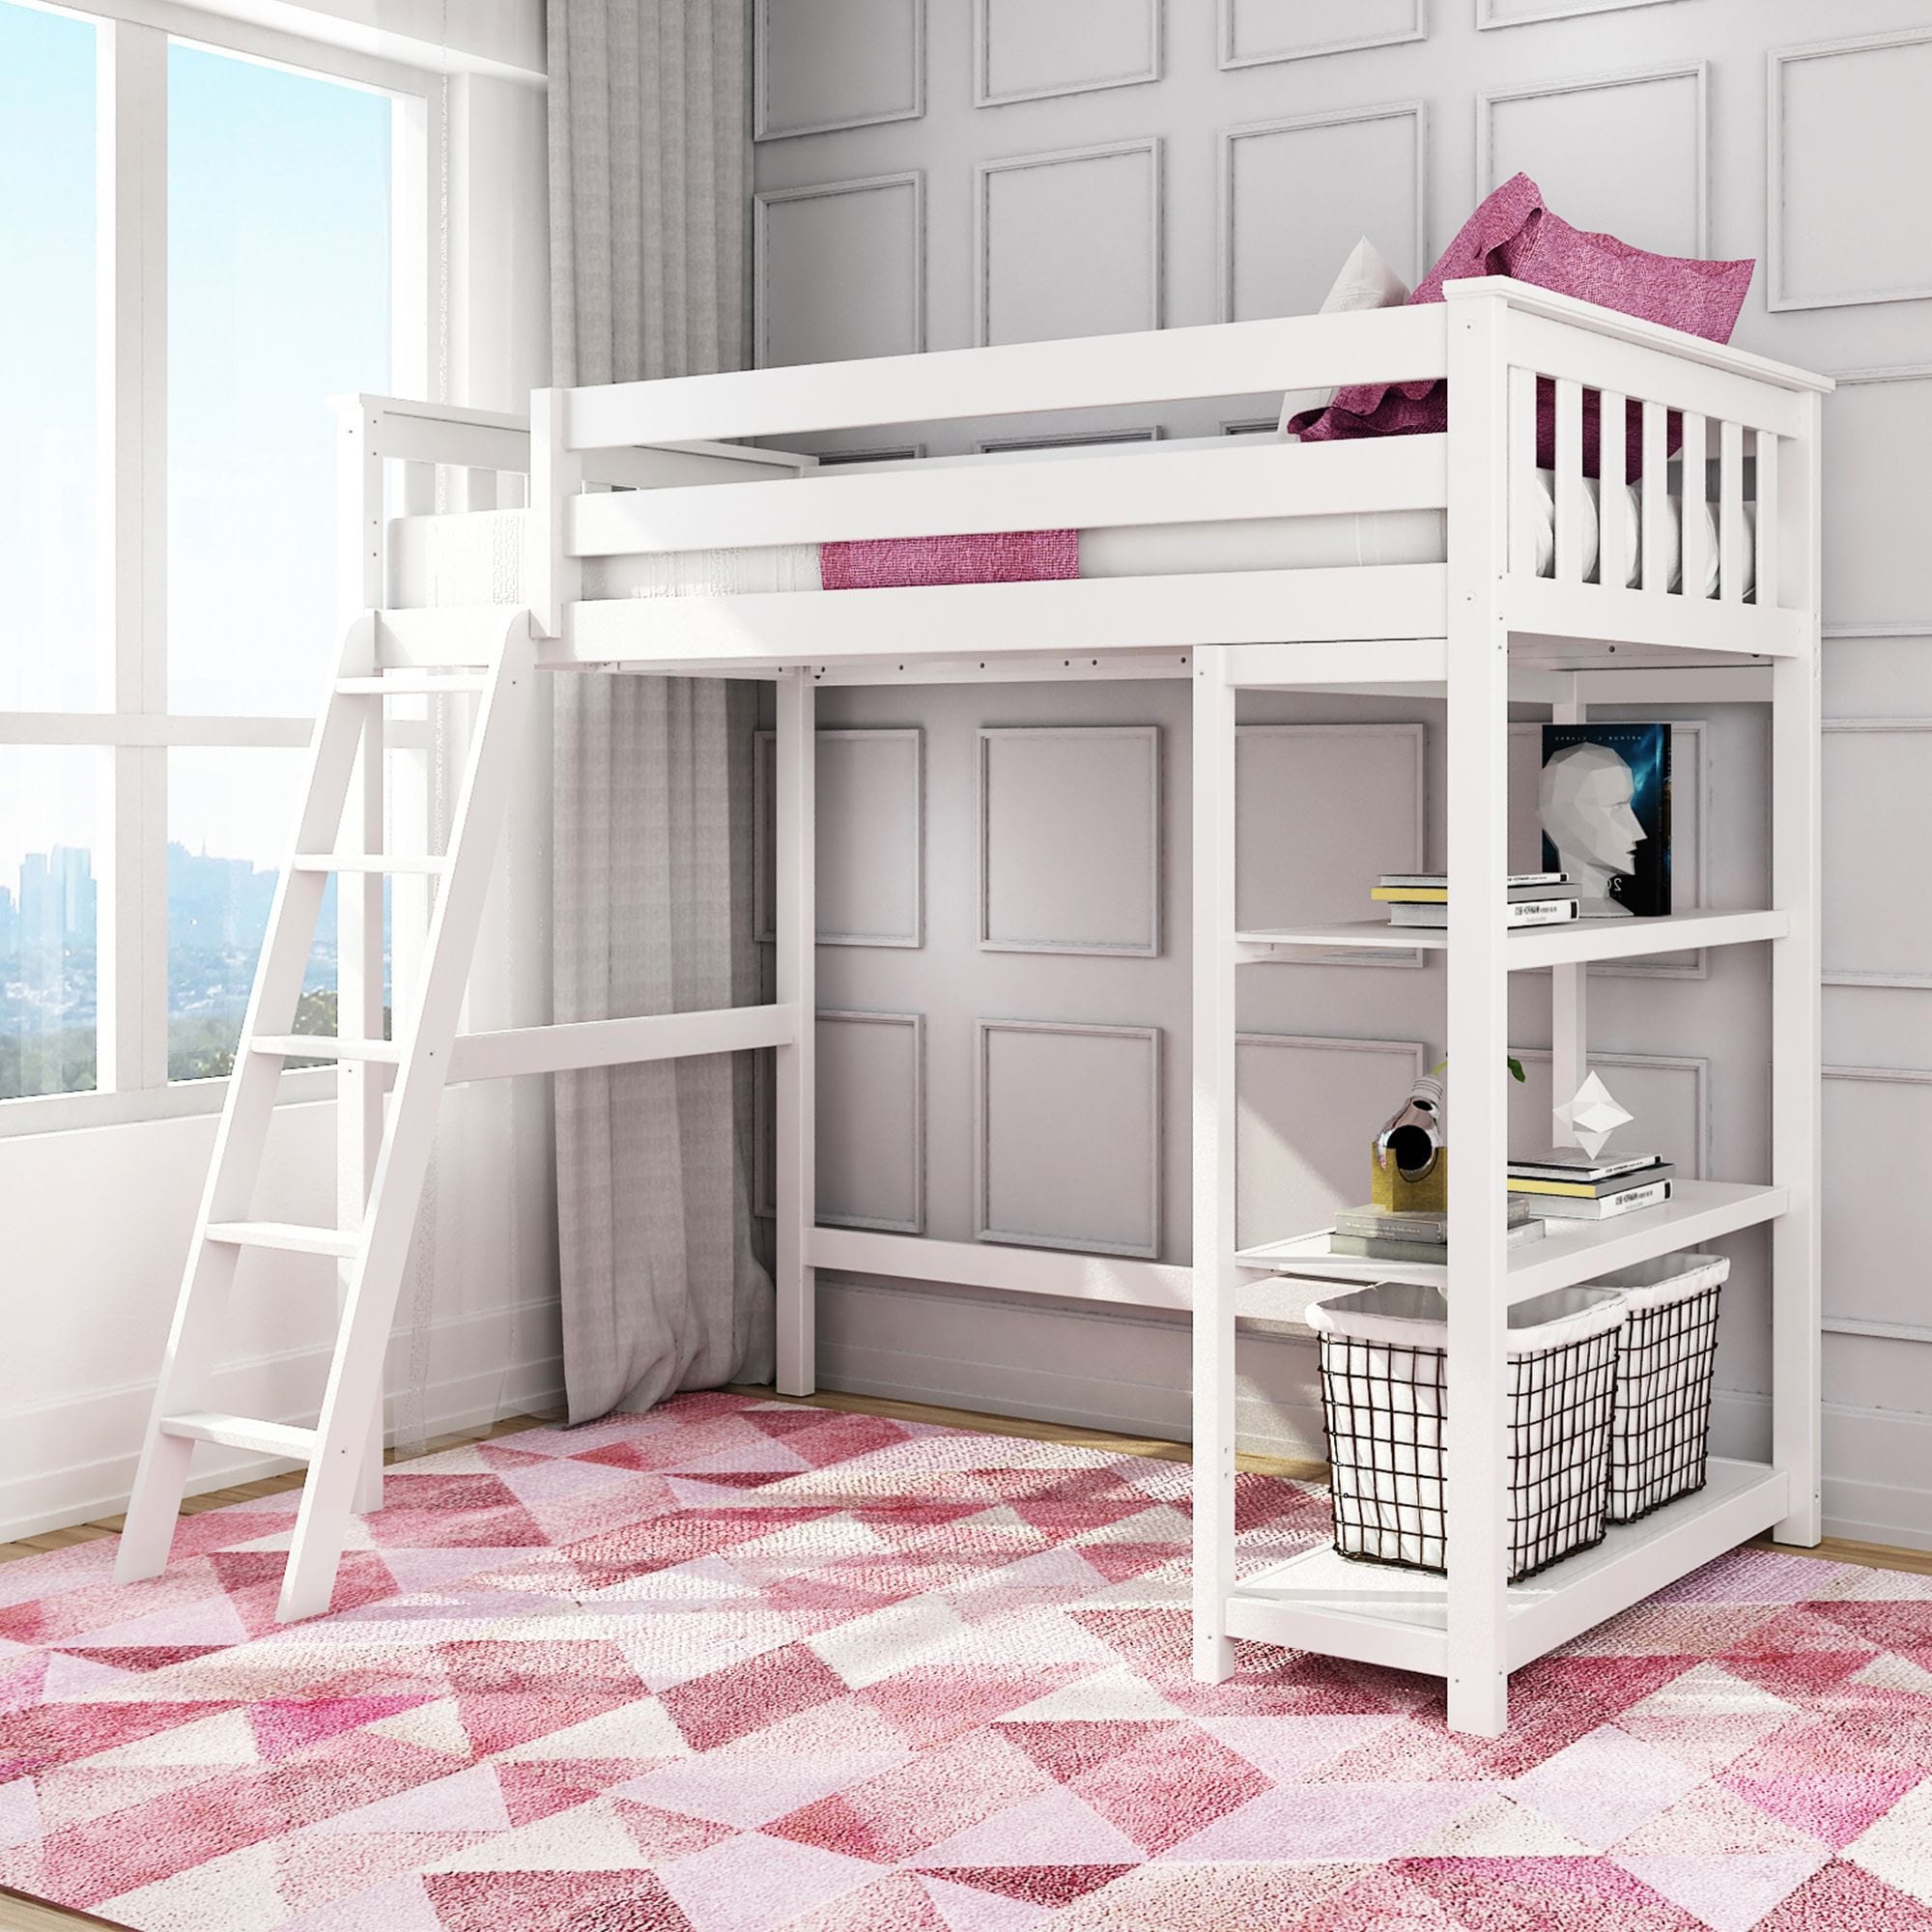 https://ak1.ostkcdn.com/images/products/is/images/direct/ce89511548668422d394c6f6ac2fdf2aee51d379/Max-%26-Lily-Twin-Size-High-Loft-Bed-with-Bookcase.jpg